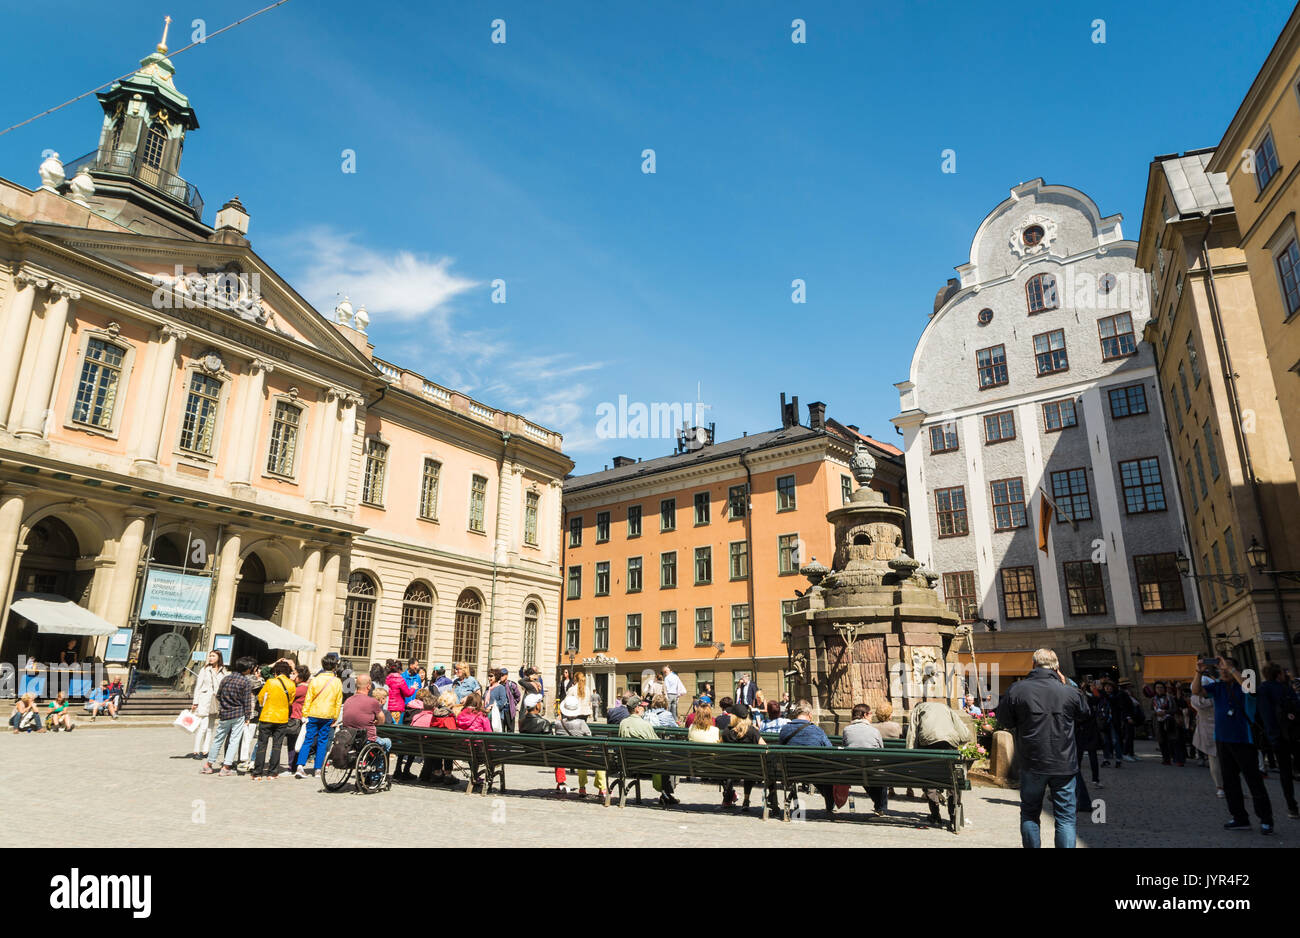 View of Stortorget square in Gamla Stan (Old Town), Stockholm, Sweden with Nobel Museum and Library in the former Stock Exchange Building Stock Photo